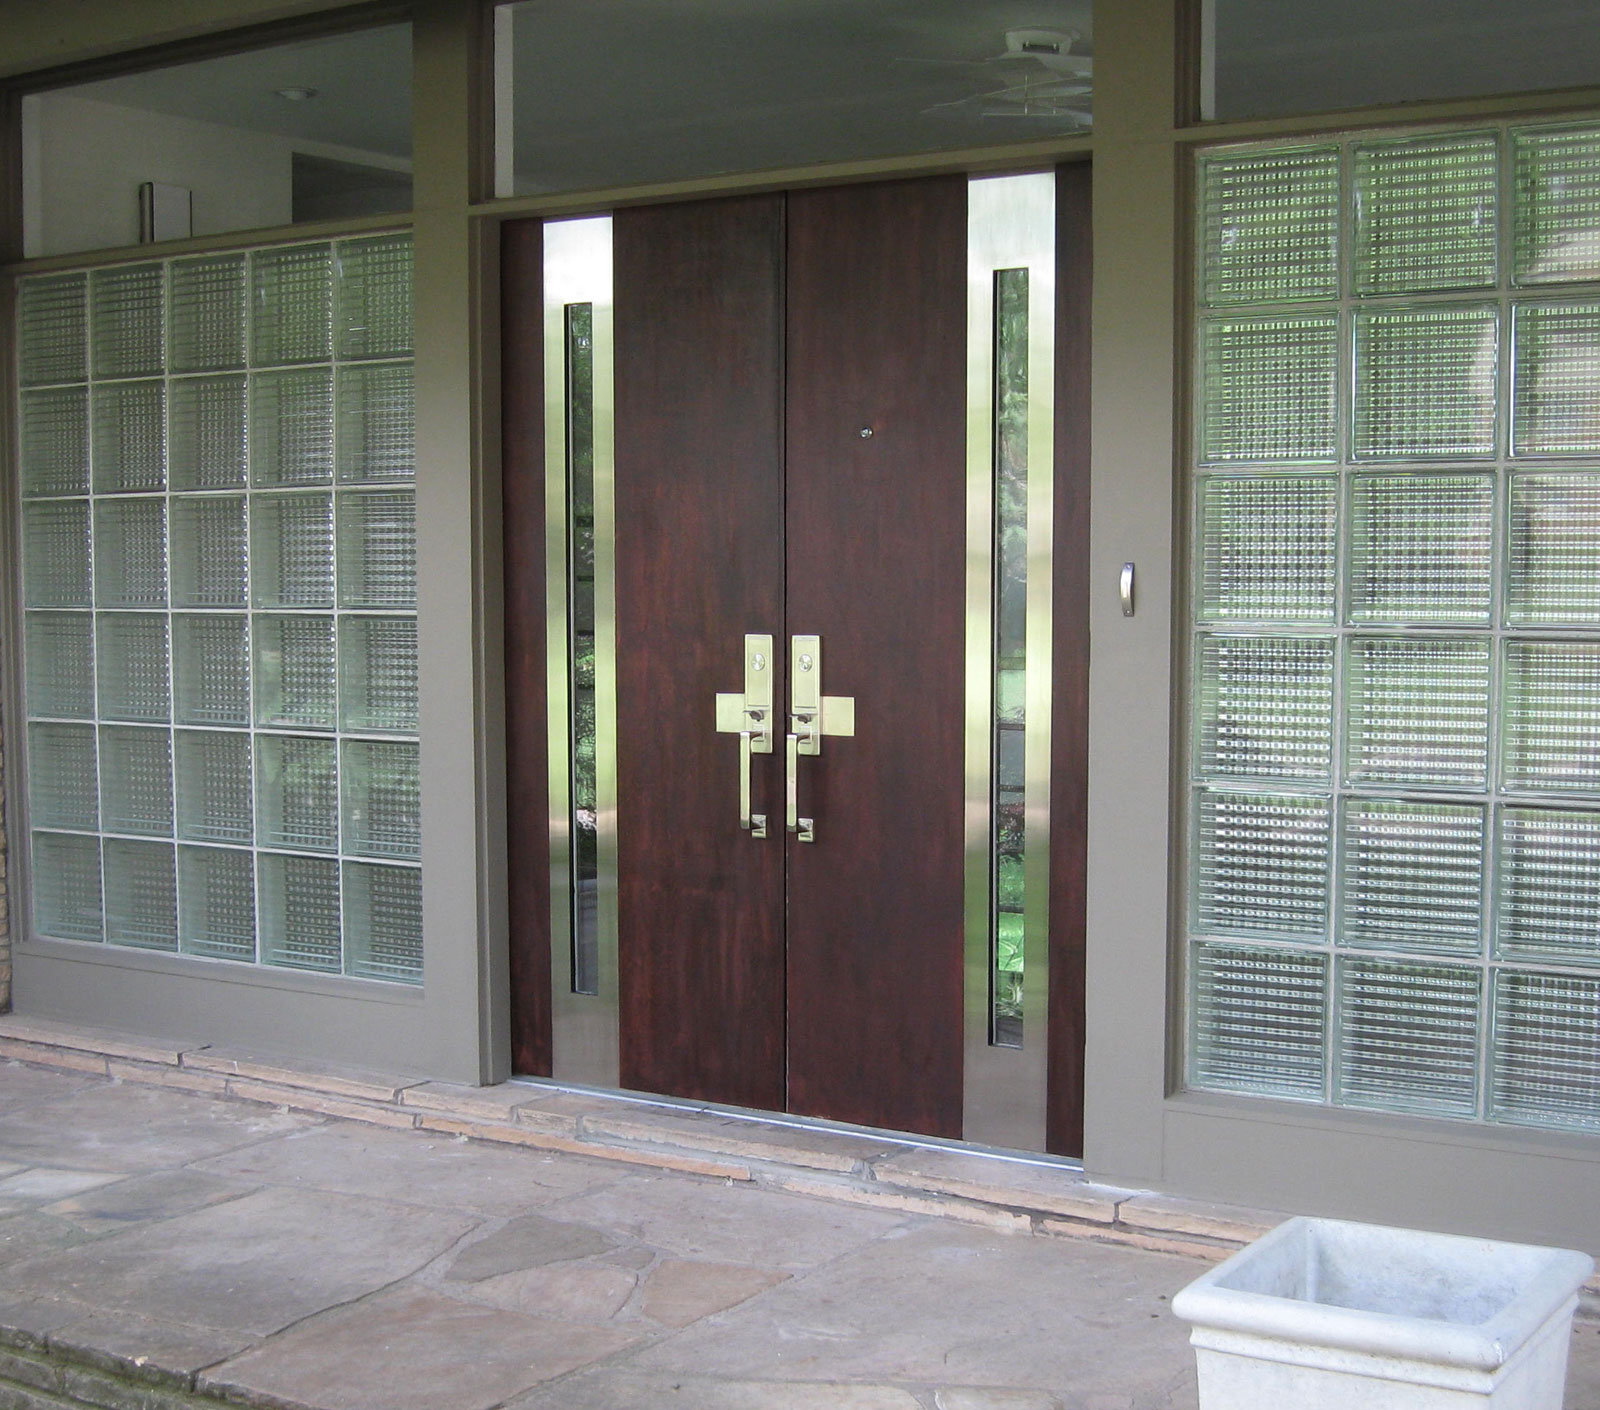 Entrance With Door Enchanting Entrance With Modern Front Door Ideas Applying Dark Brown Color Combined With Door Levers In Silver Color And Completed With Small Glass Screens On Side Door Exterior Front Door Ideas: The “Face” Of The House